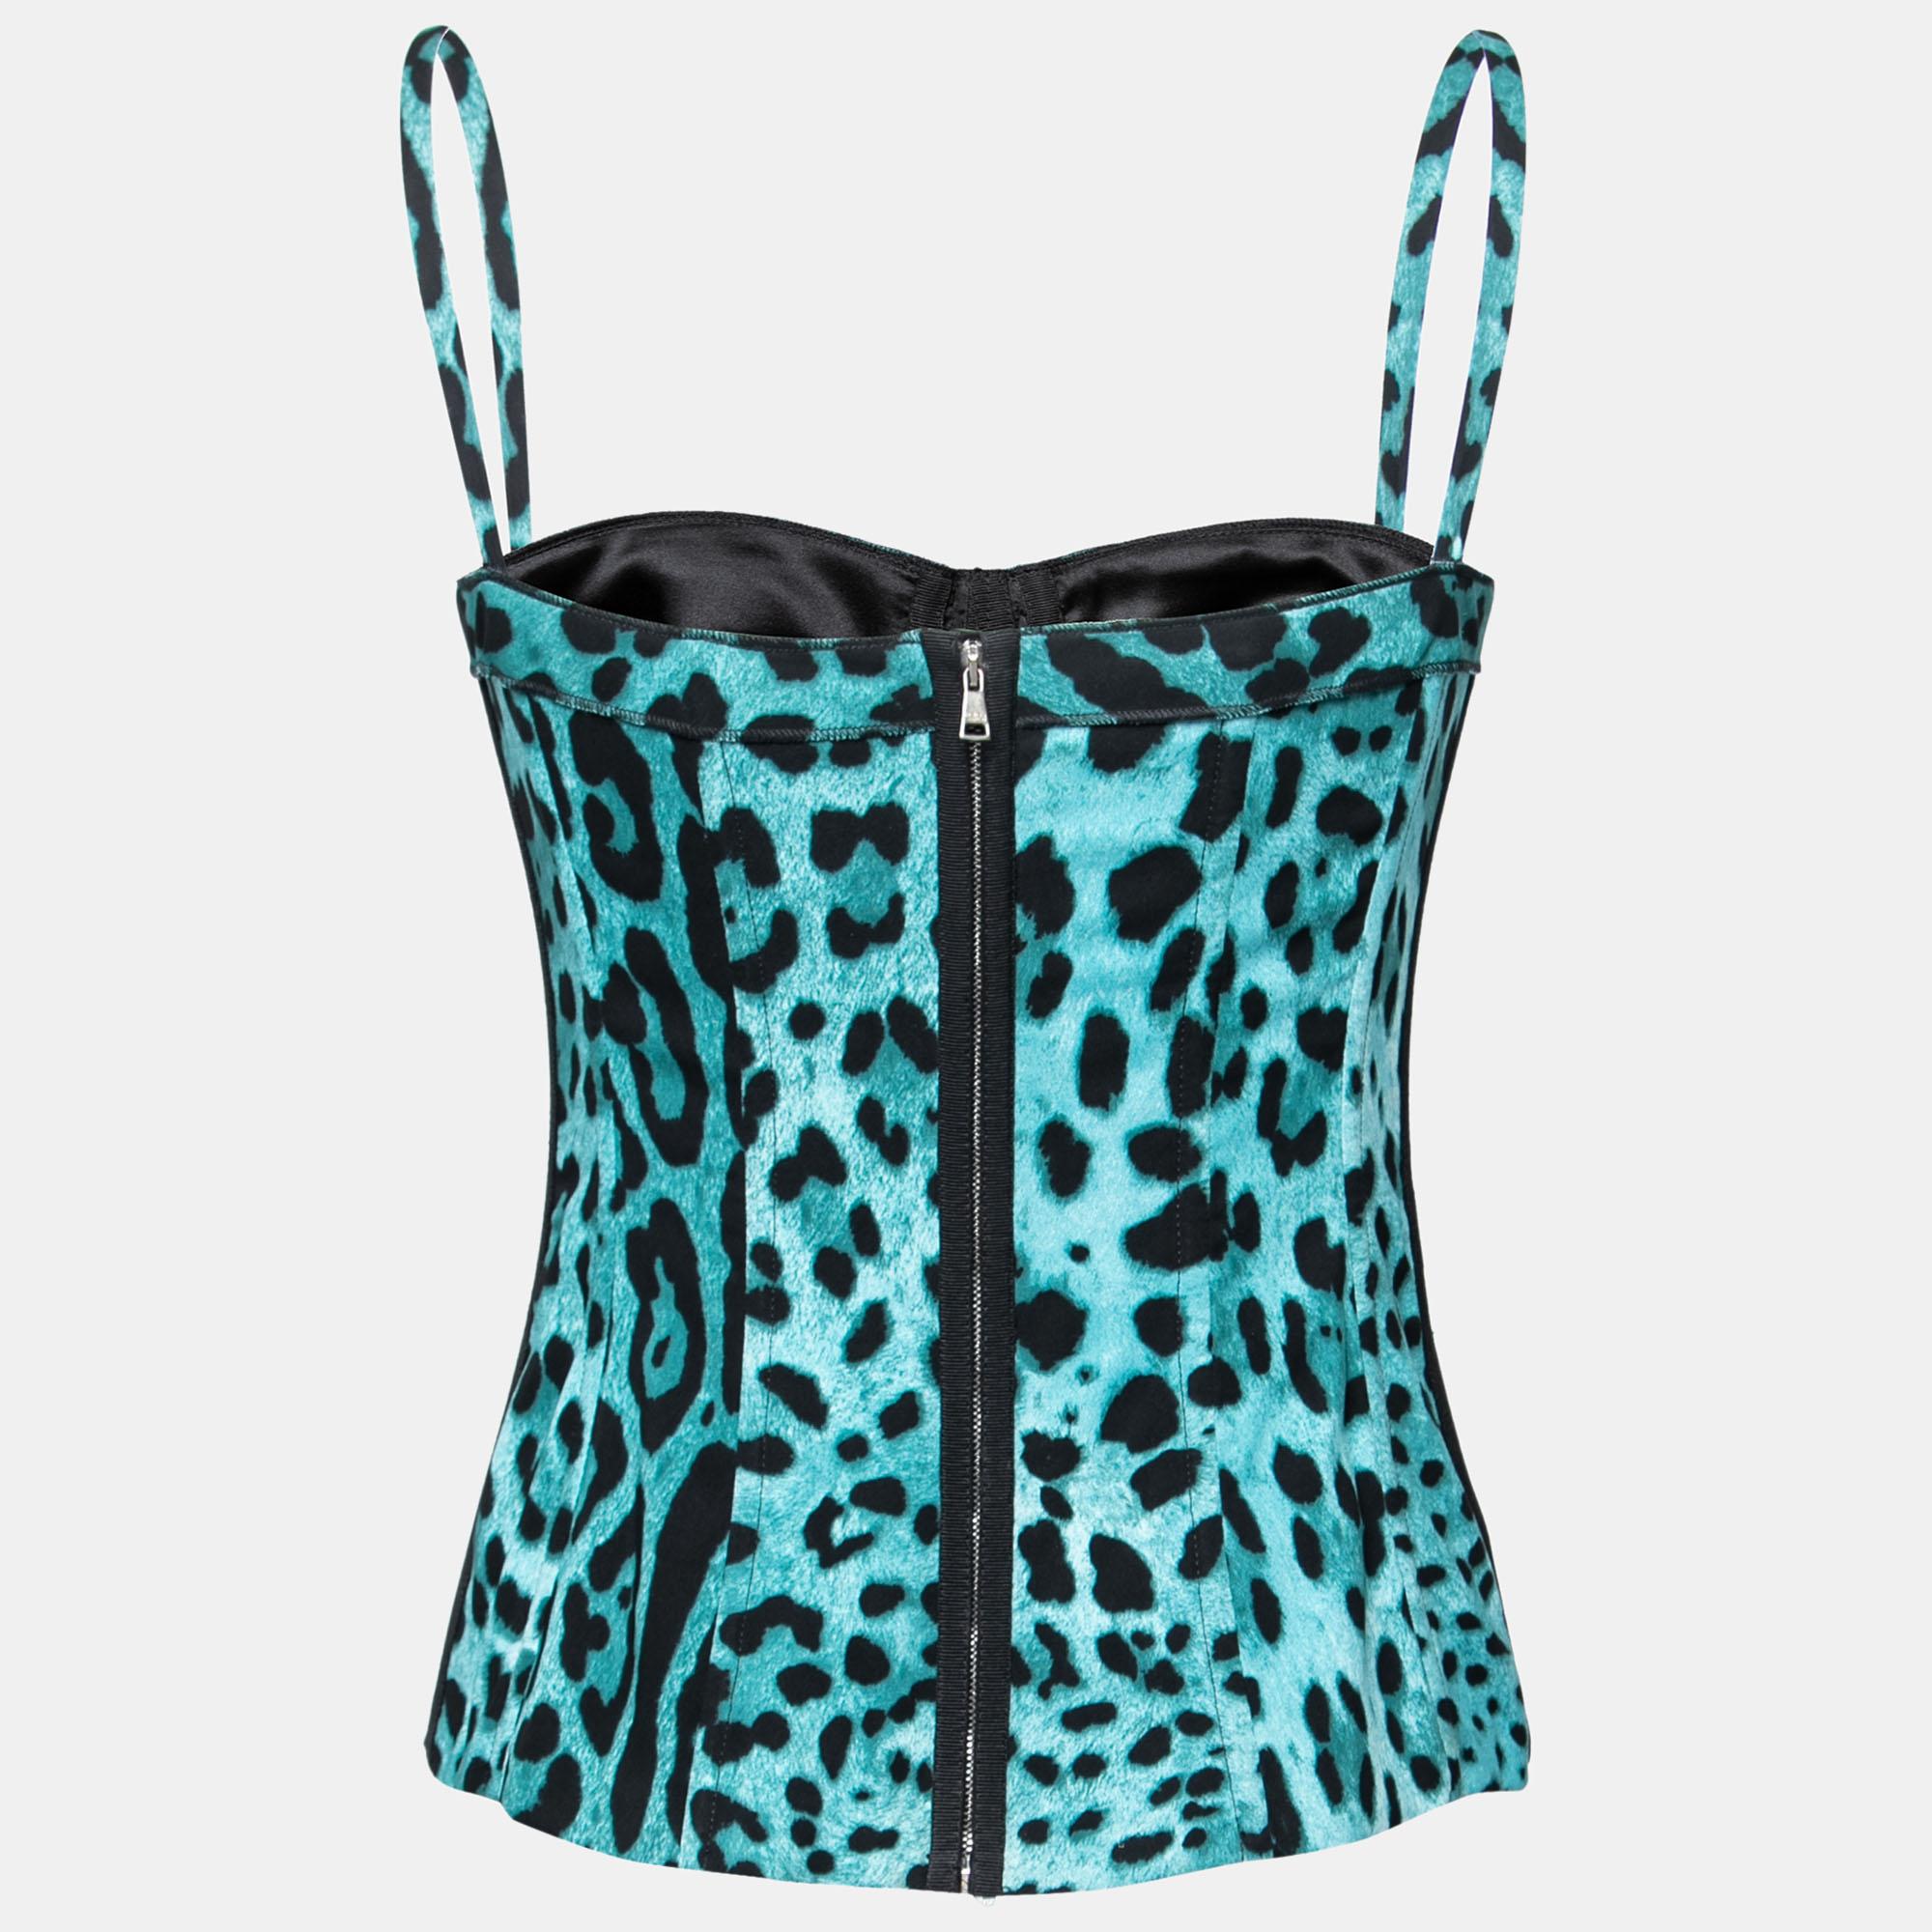 Gorgeous in appeal and chic, this corset top from the House of Dolce & Gabbana is worth owning. Tailored from green knit fabric, this animal-printed top flaunts slim shoulder straps with a zipper at the back. Bring it home today!

